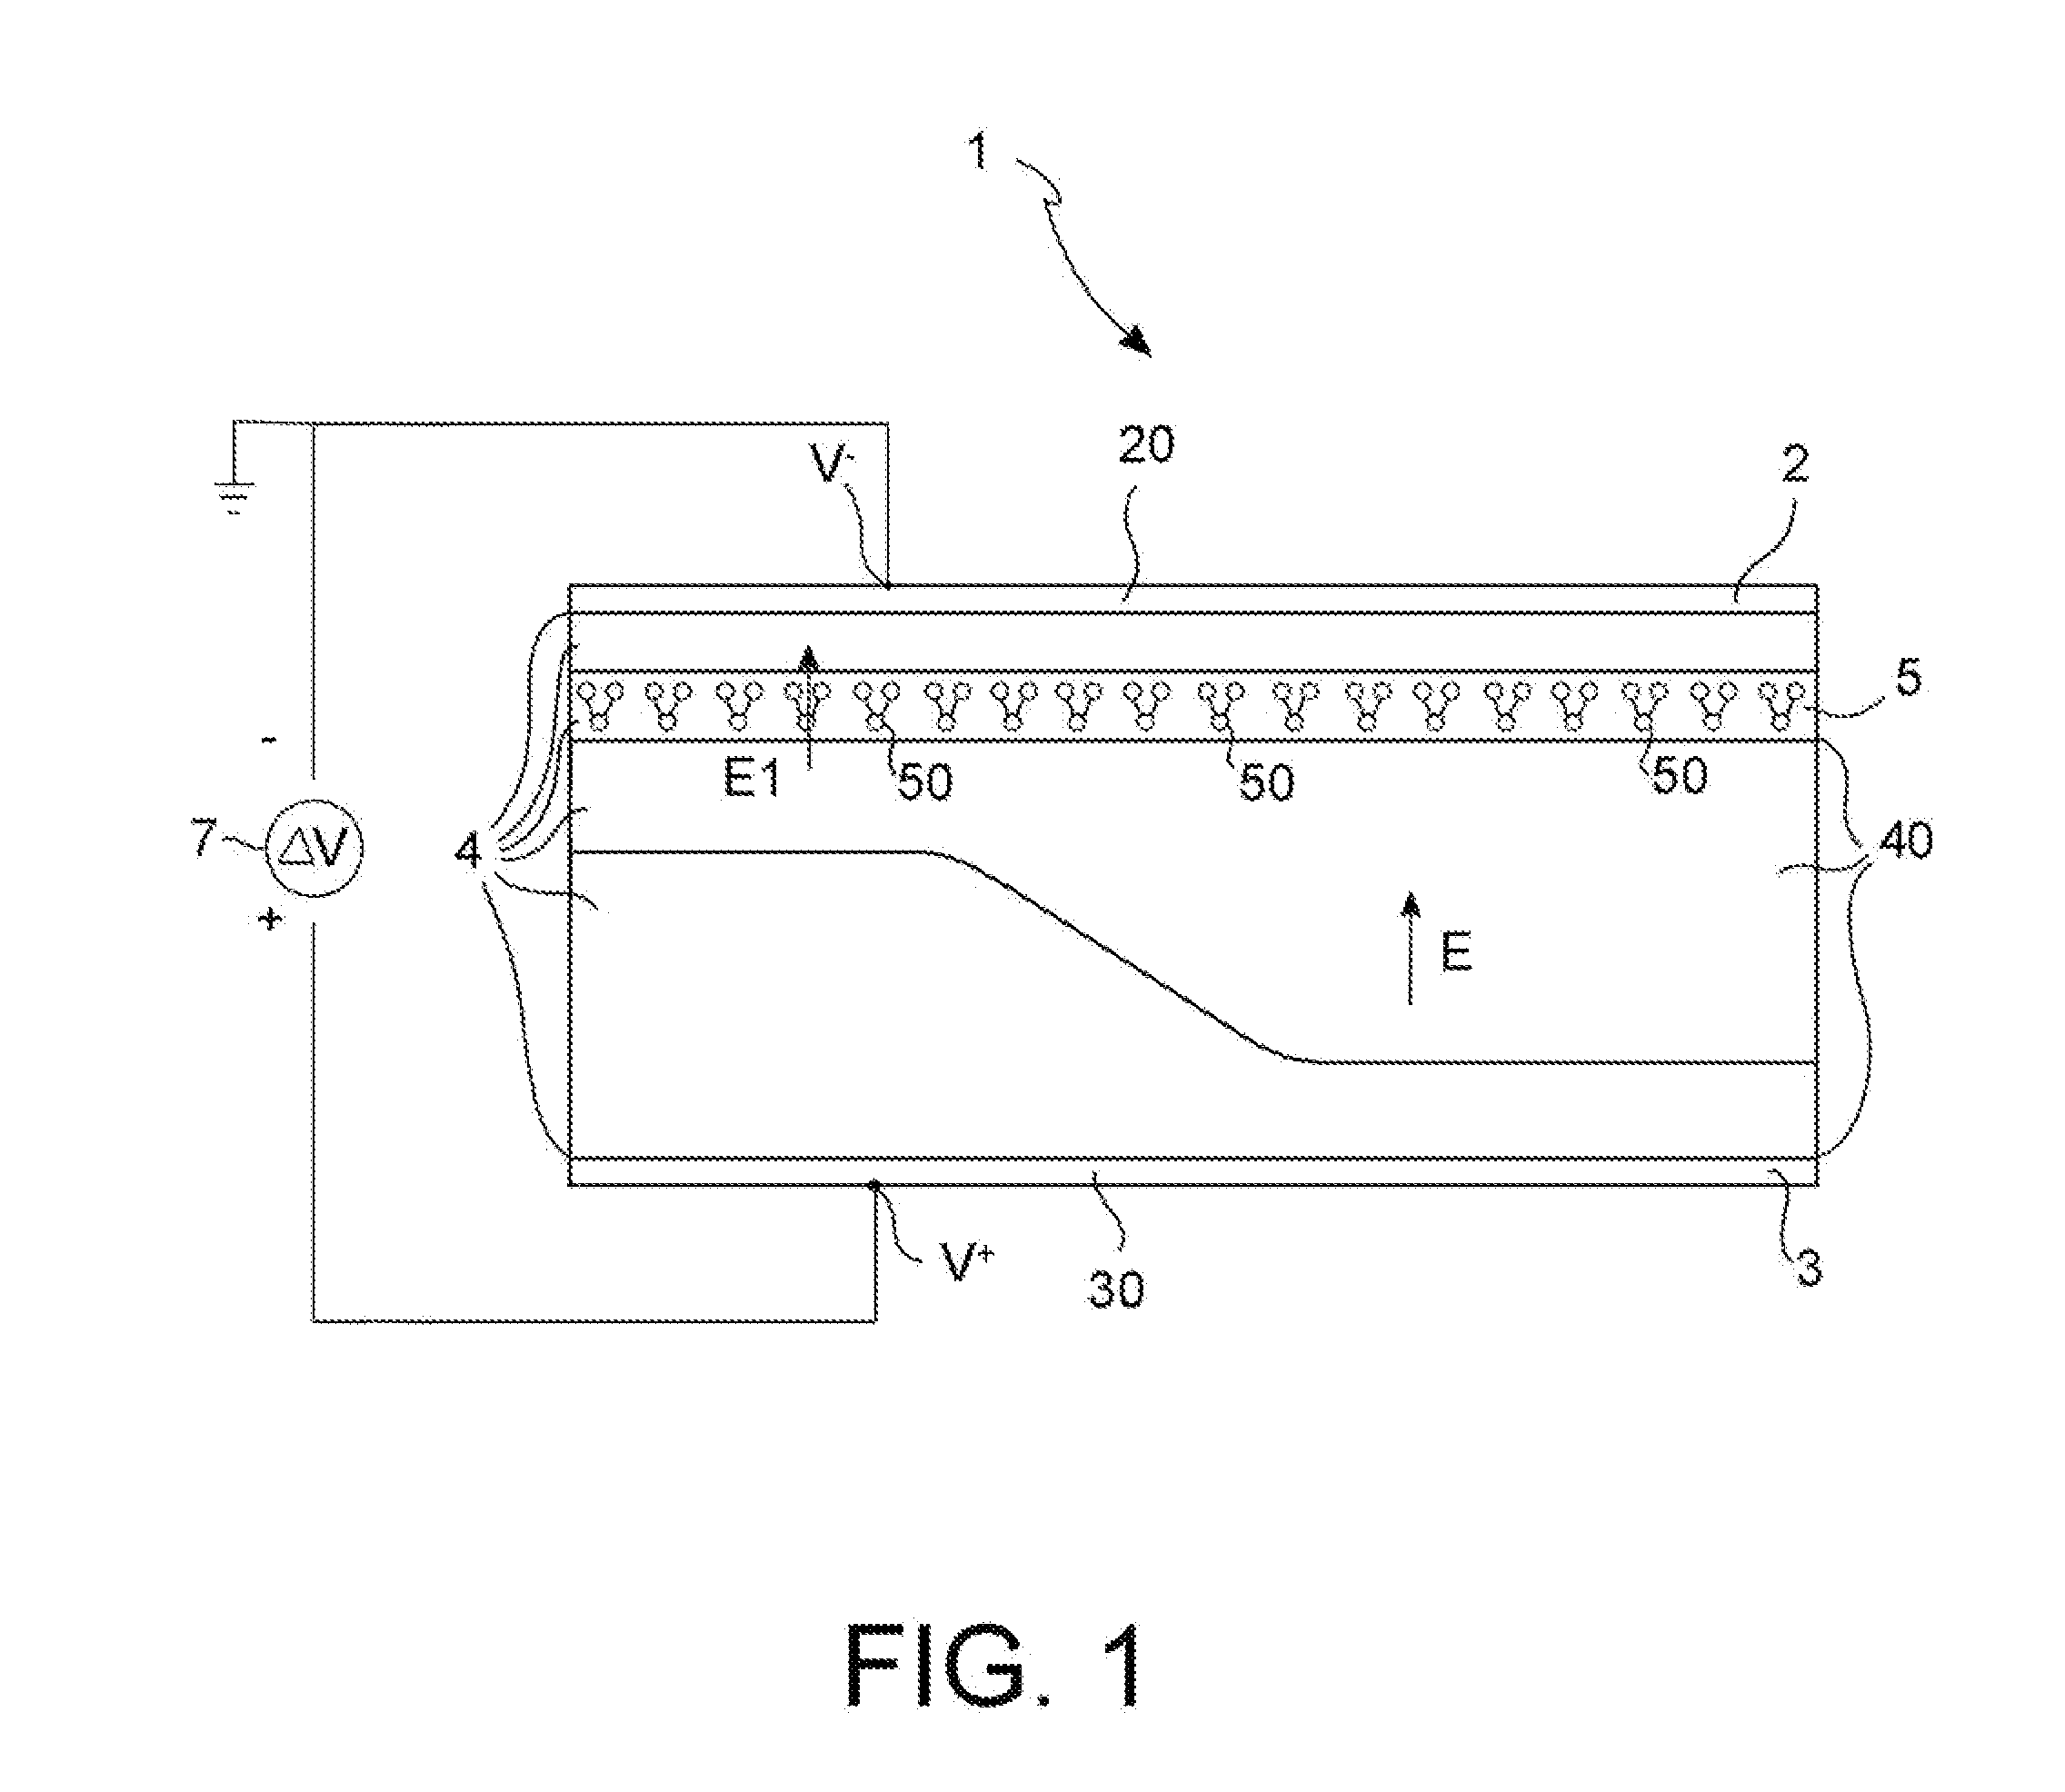 Electronic device for implementing digital functions through molecular functional elements